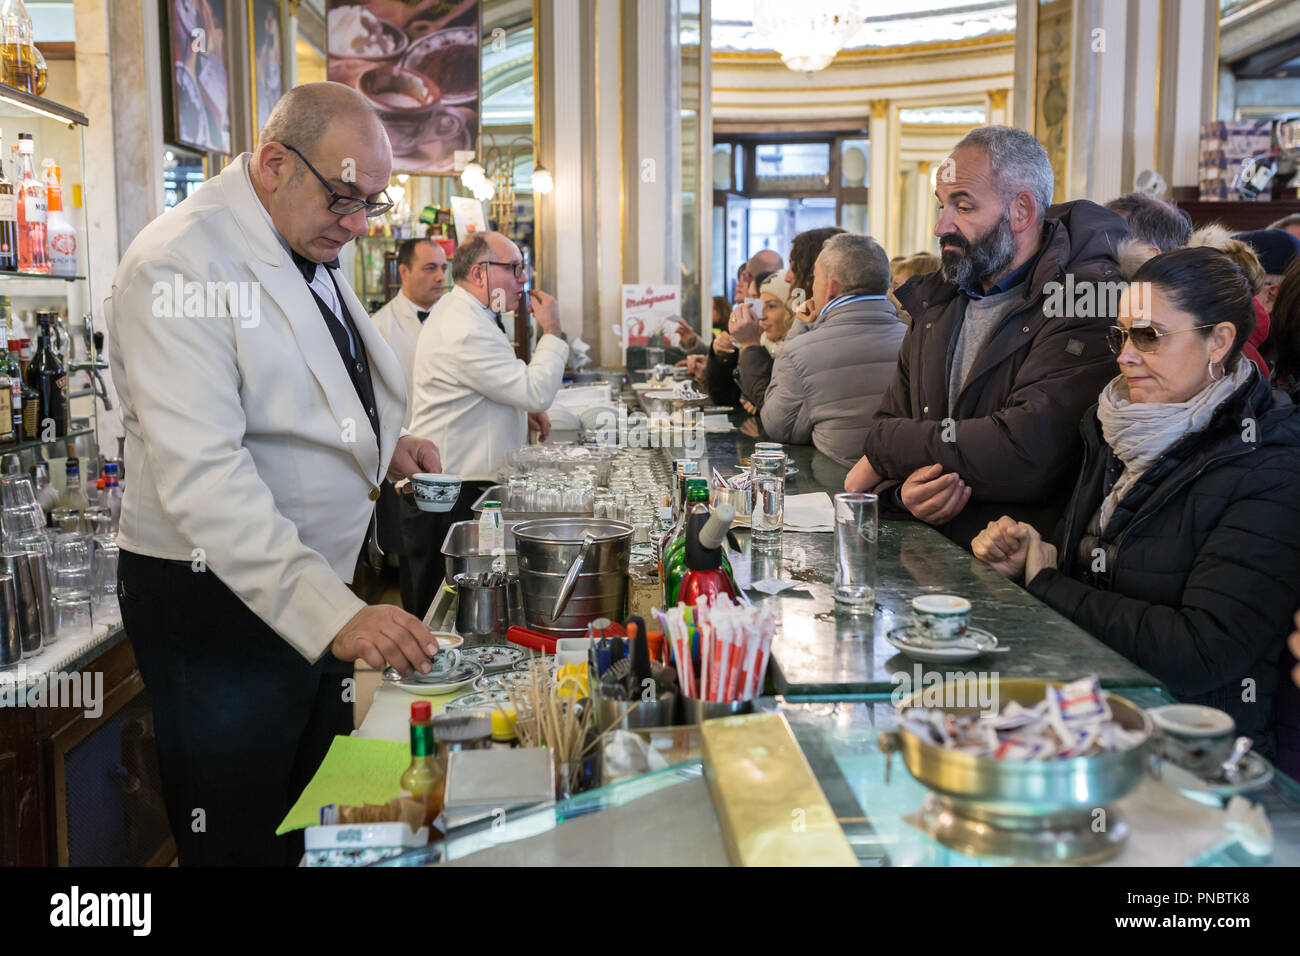 Naples, Italy - December 3, 2017: Unidentified people visiting famous italian cafe Gambrinus. It is a historical coffee shop in Naples Stock Photo